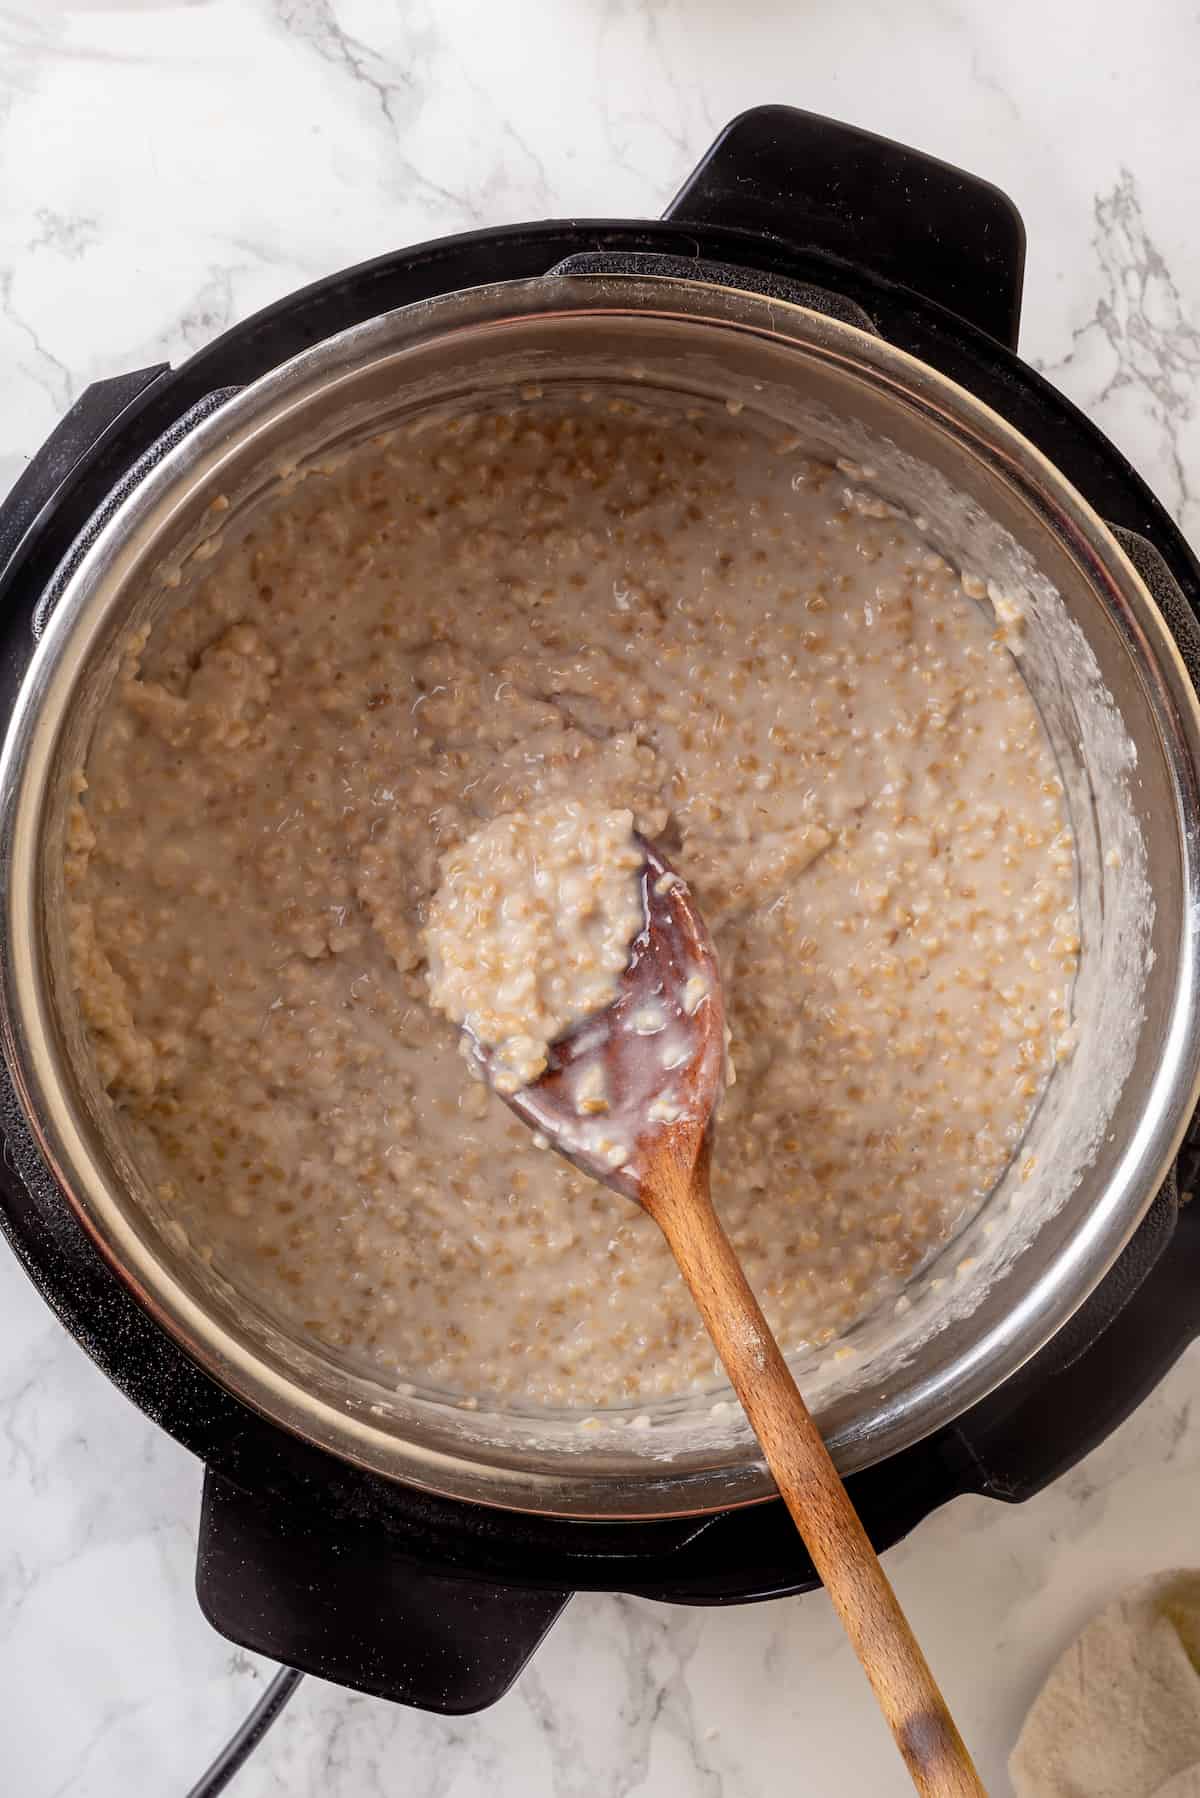 Overhead view of Instant Pot steel-cut oats with wooden spoon